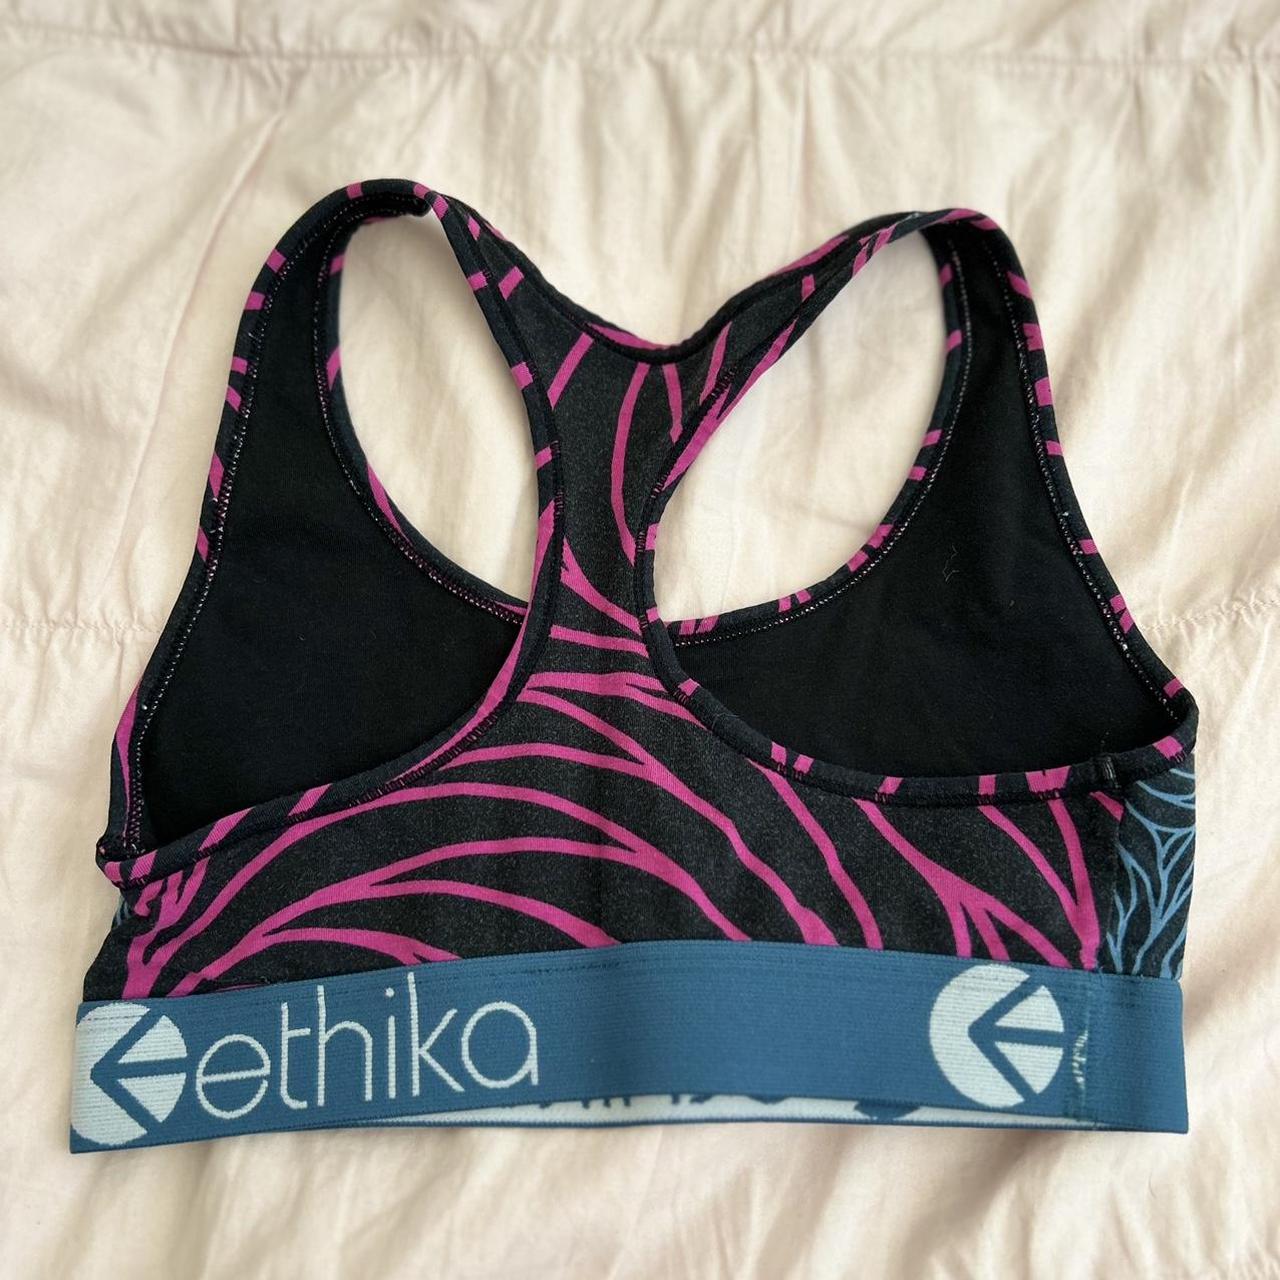 Ethika Sports Bra , - gently used , - soft and comfy